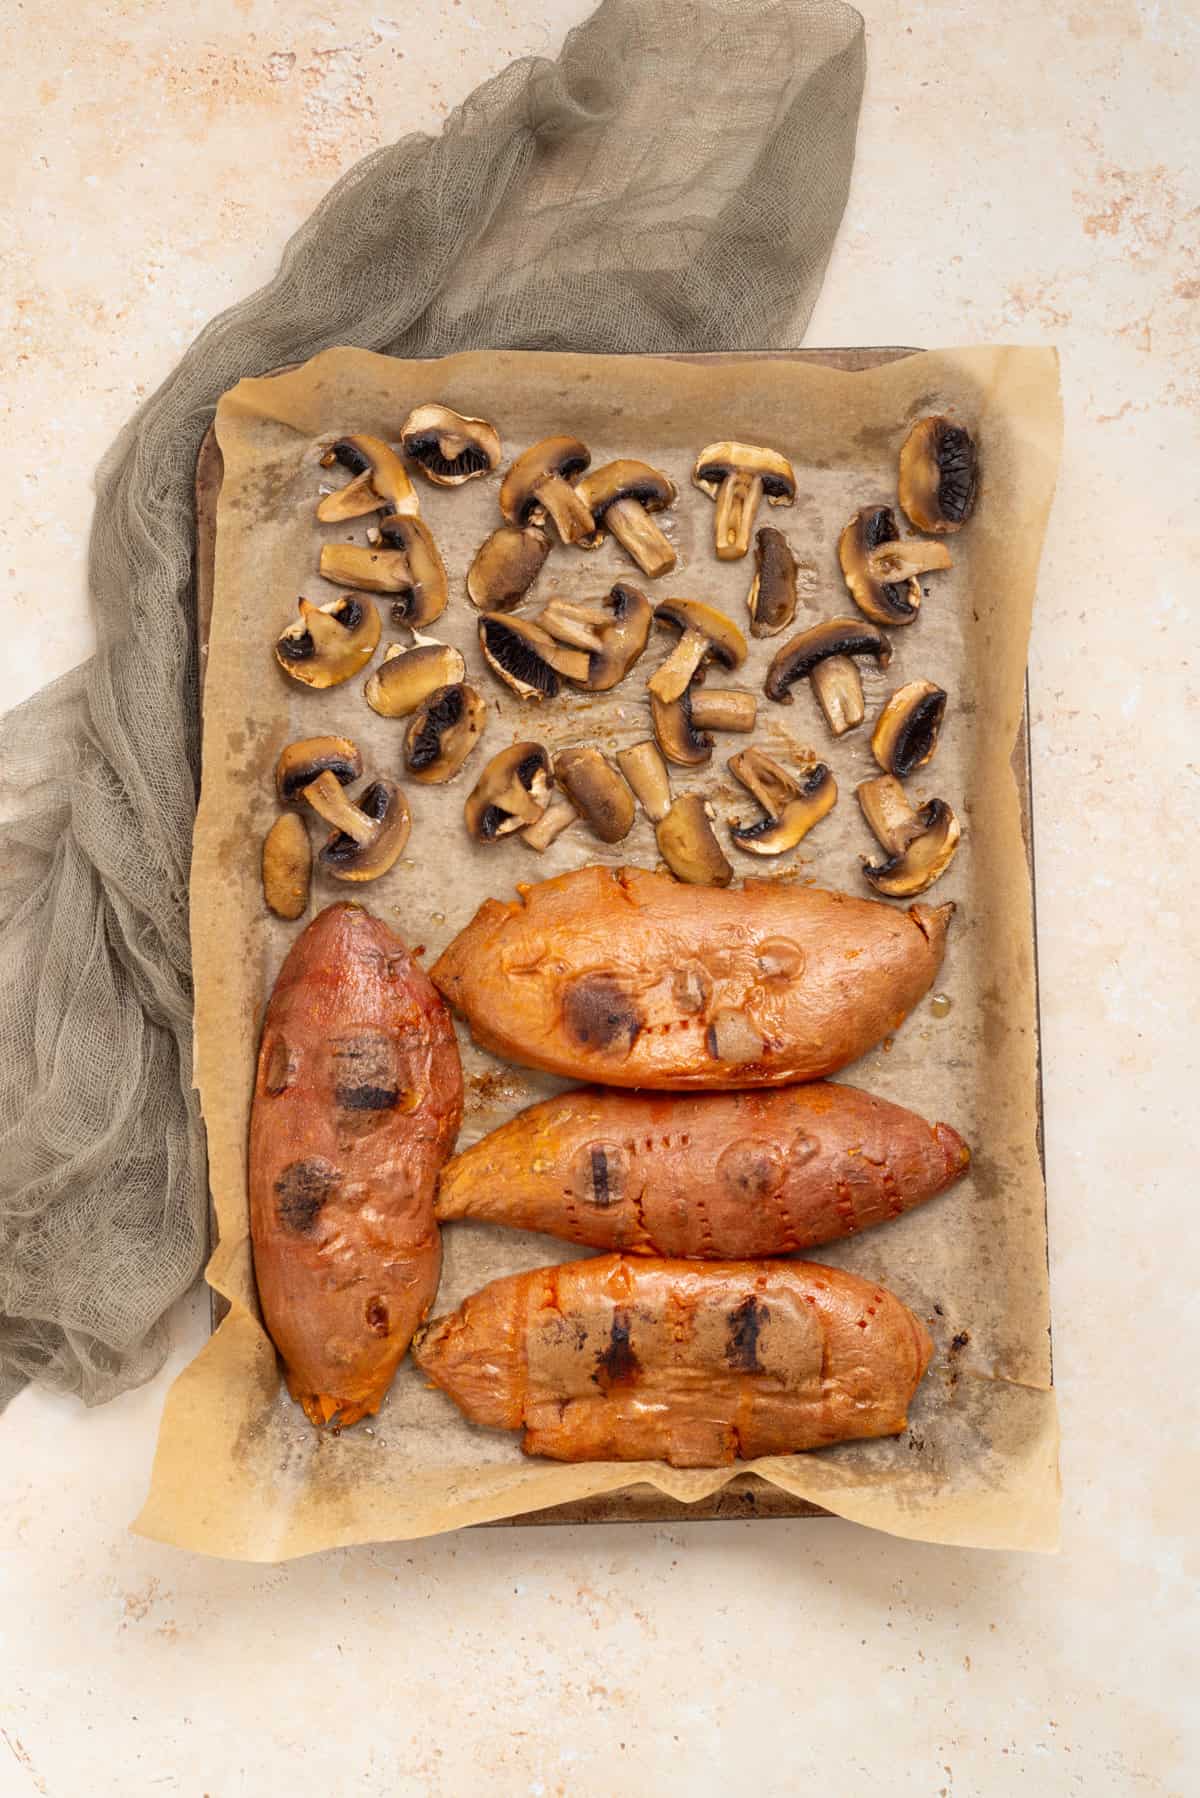 An image of baked sweet potato skins and mushrooms in a baking sheet.